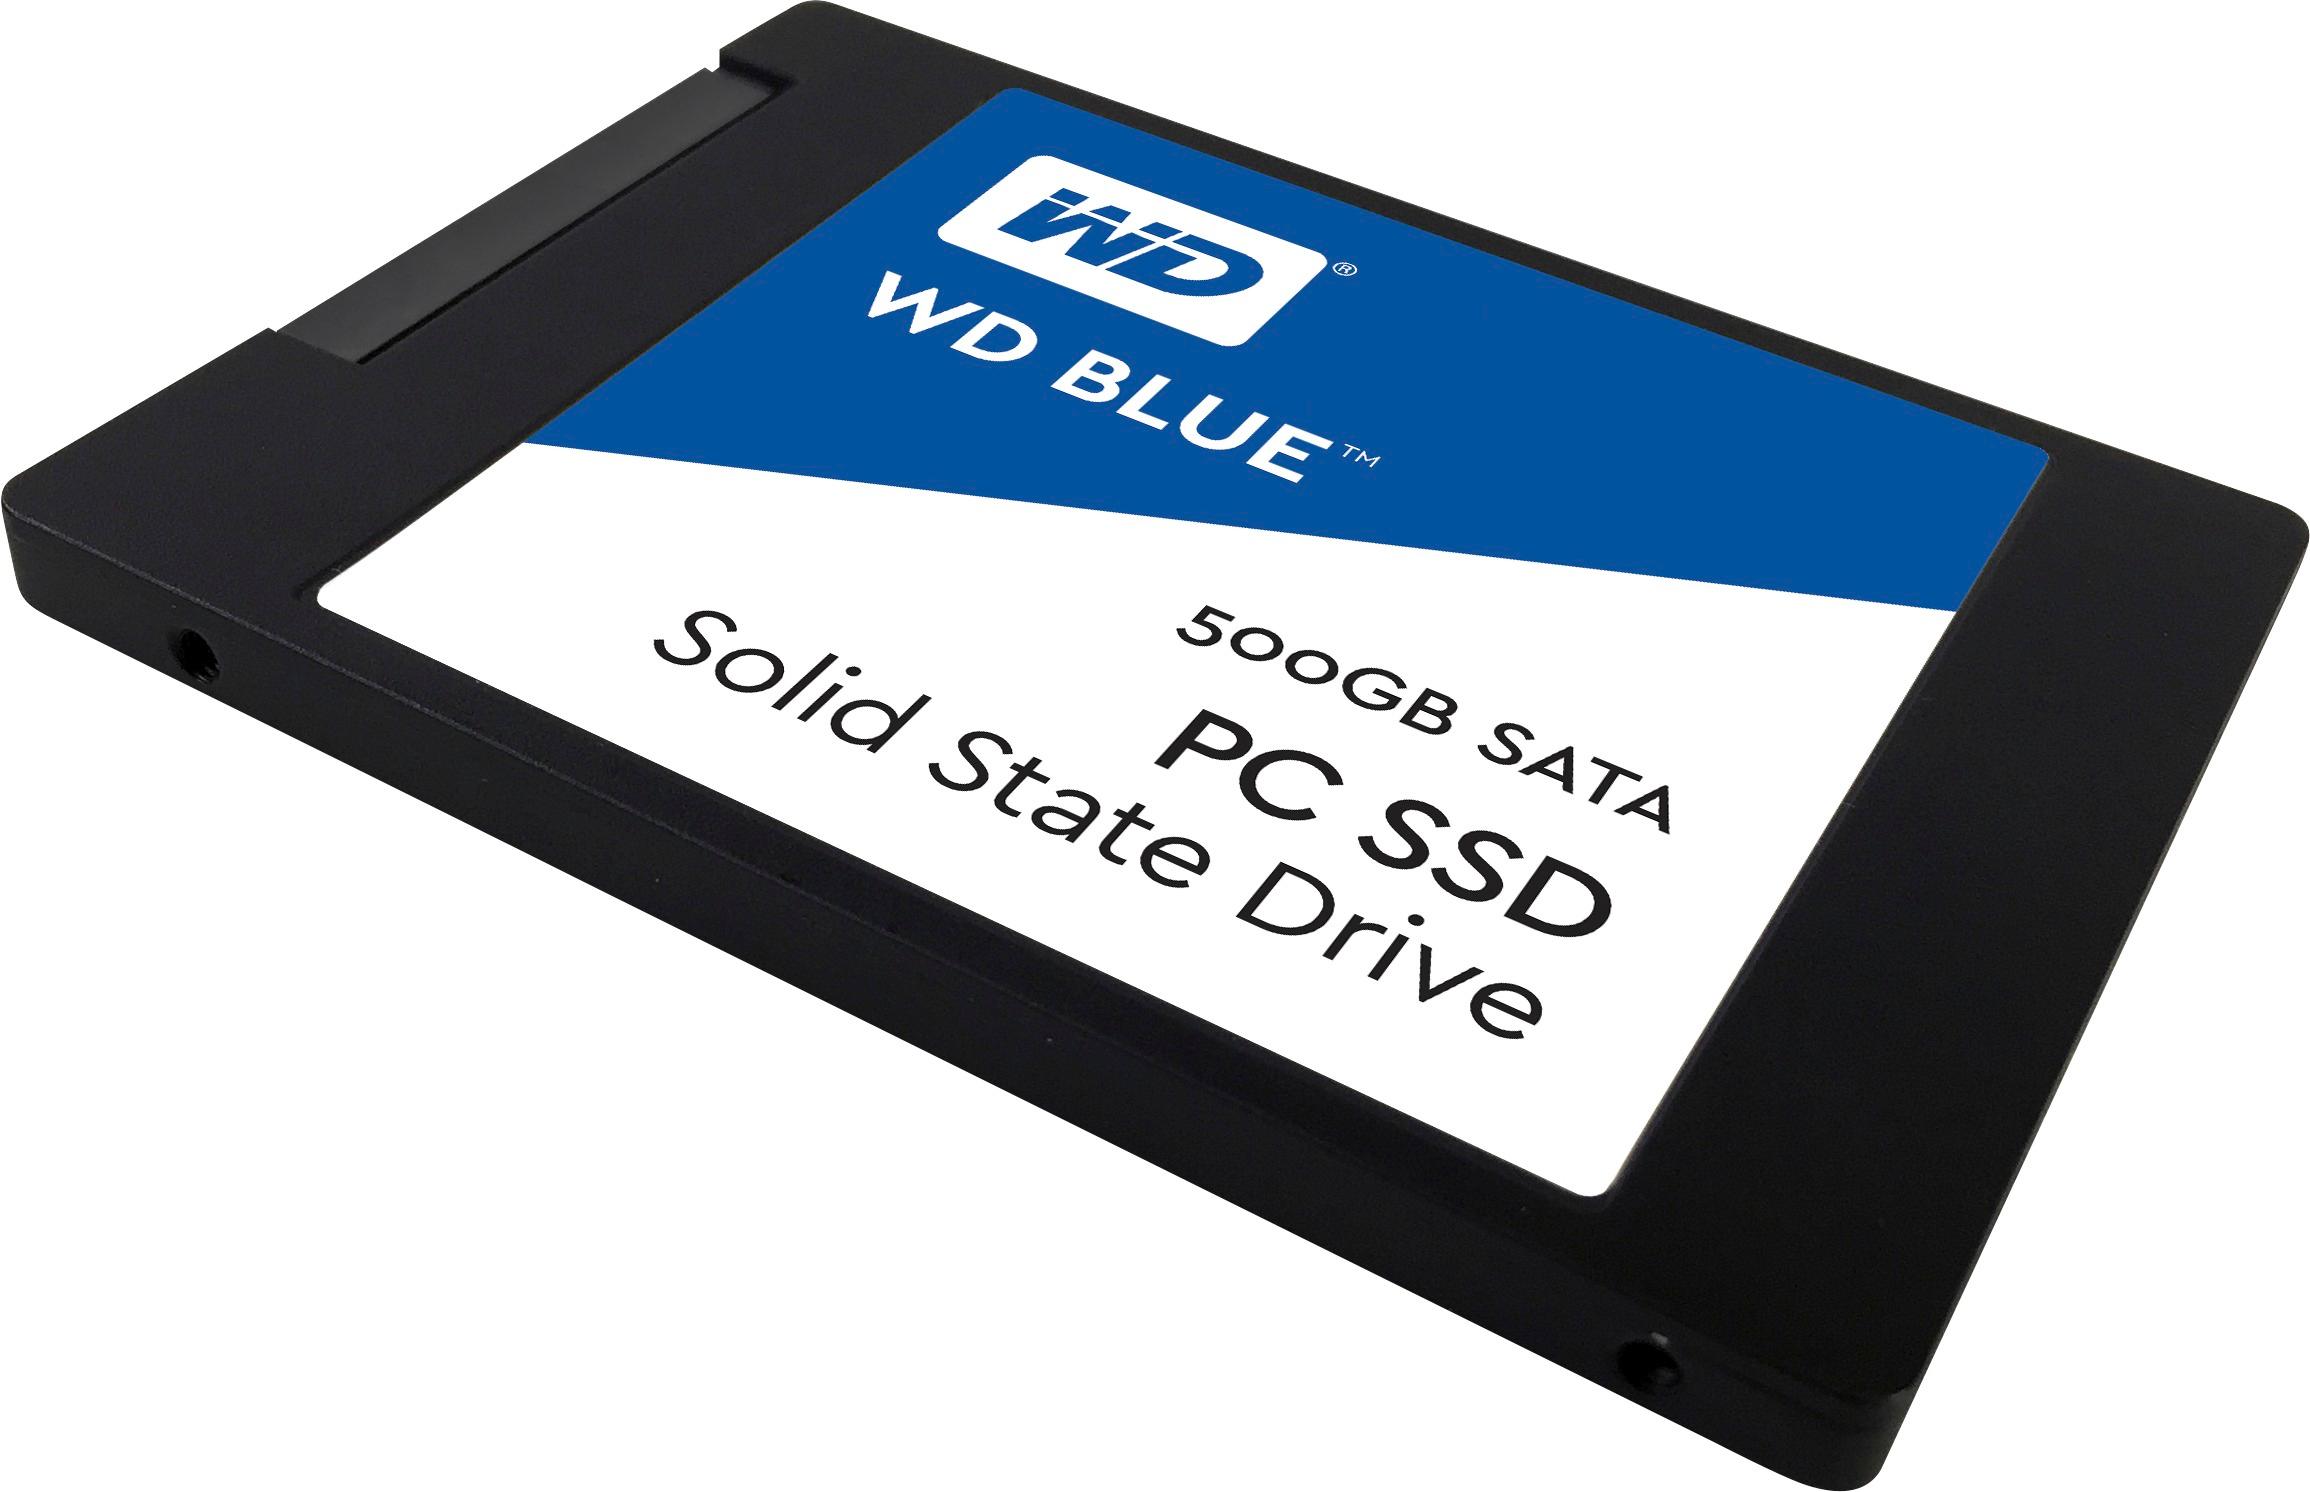 What Is A Solid State Drive?